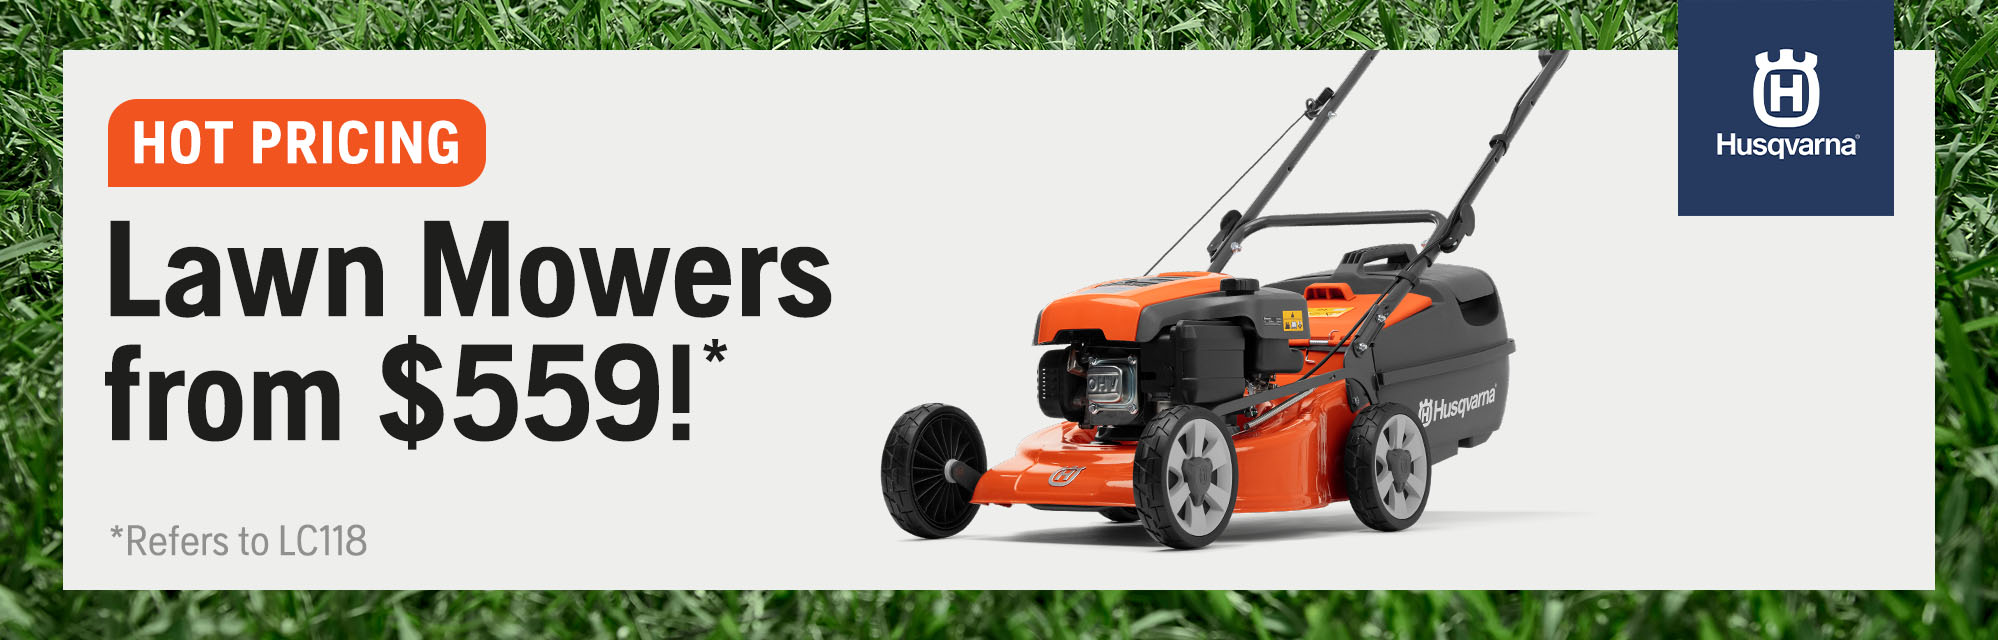 Lawn Mowers from $559